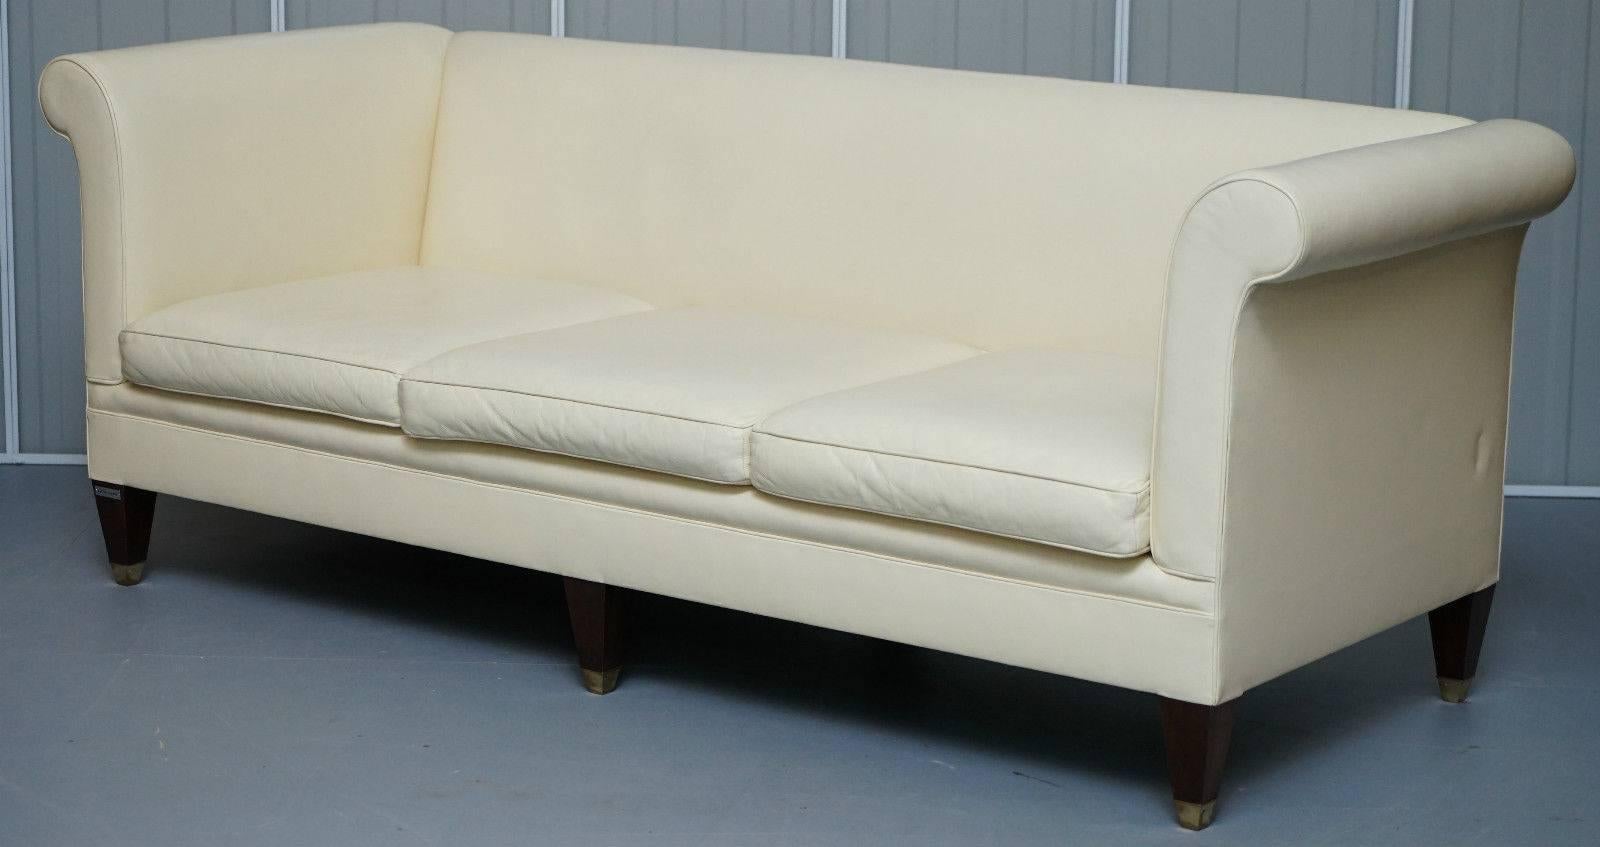 We are delighted to offer for sale this very rare custom made to order stamped Ralph Lauren Graham cream leather sofa in fully restored condition.

Where to begin! If you like quality seating then this is just about as fine as you will find